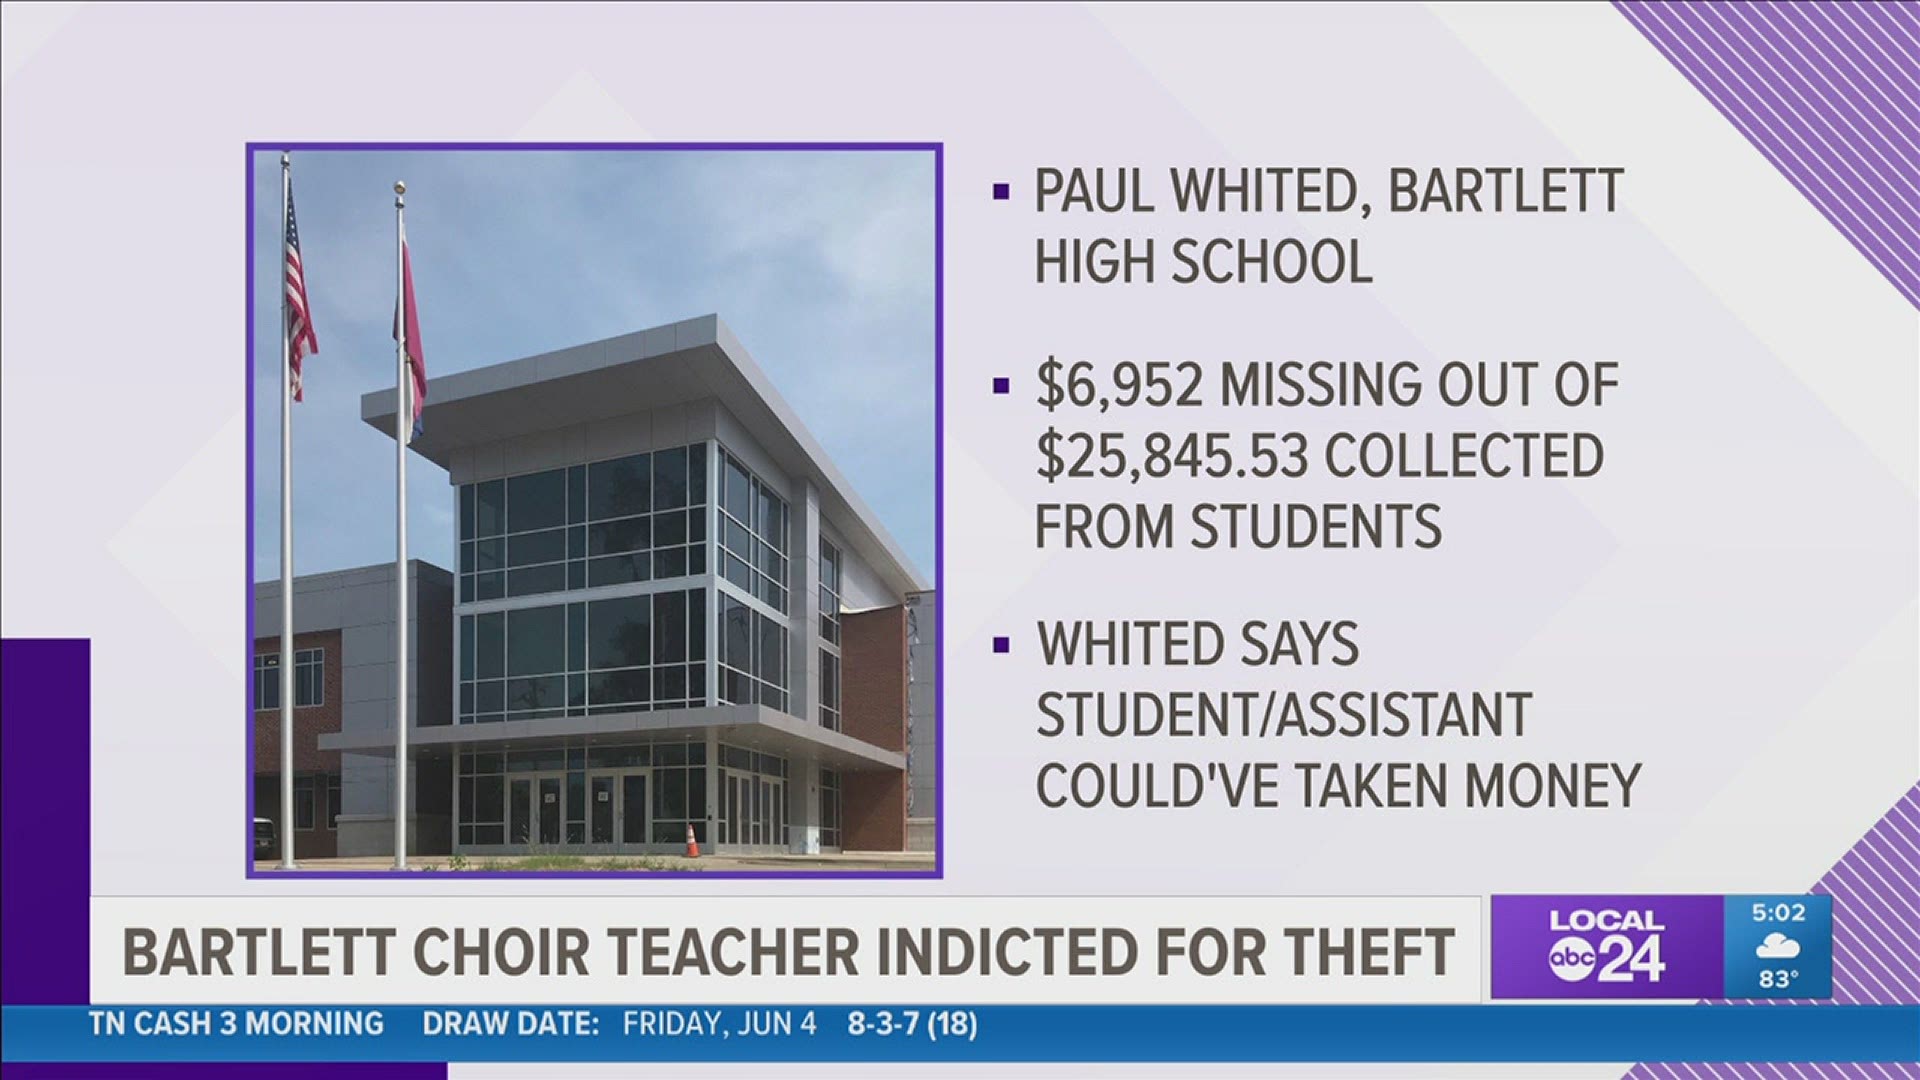 Paul Whited, the choral teacher at Bartlett High School, was charged with one count of theft over $2,500.